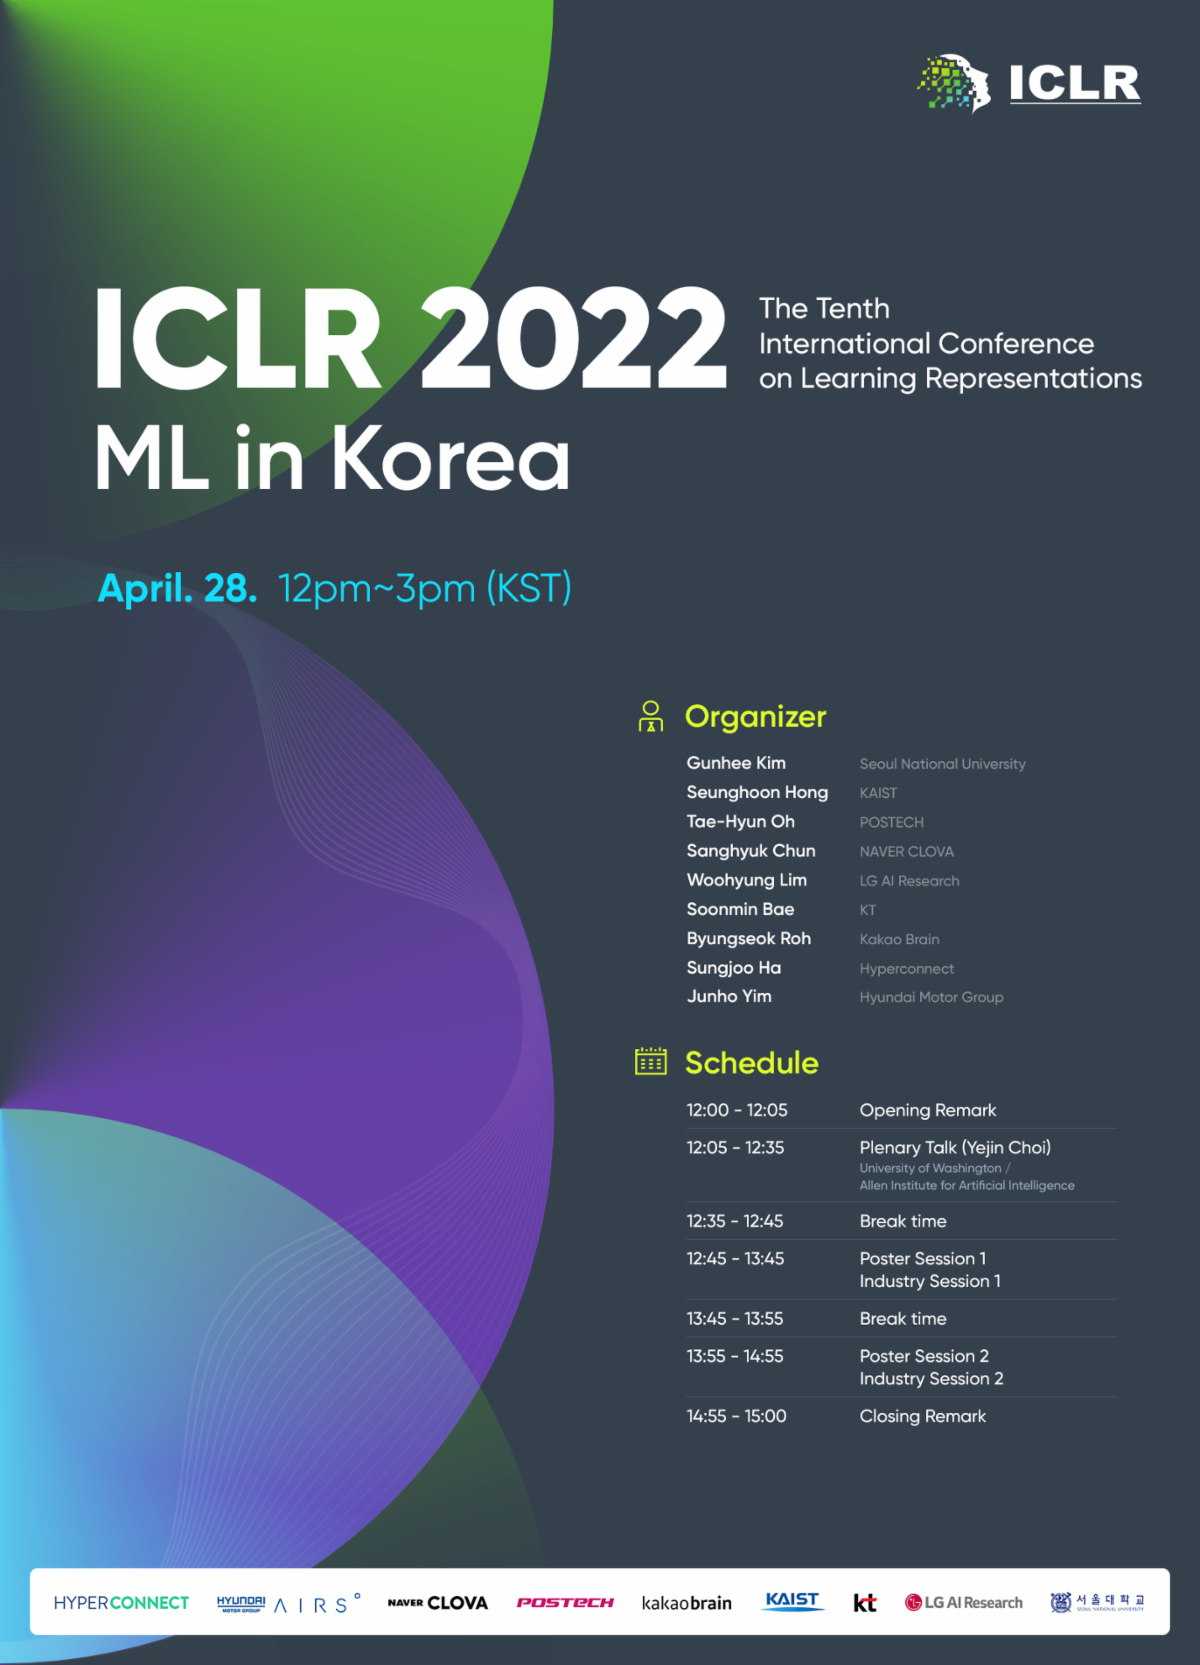 LG AI Research to Participate in ICLR 2022 Social ML in Korea LG AI